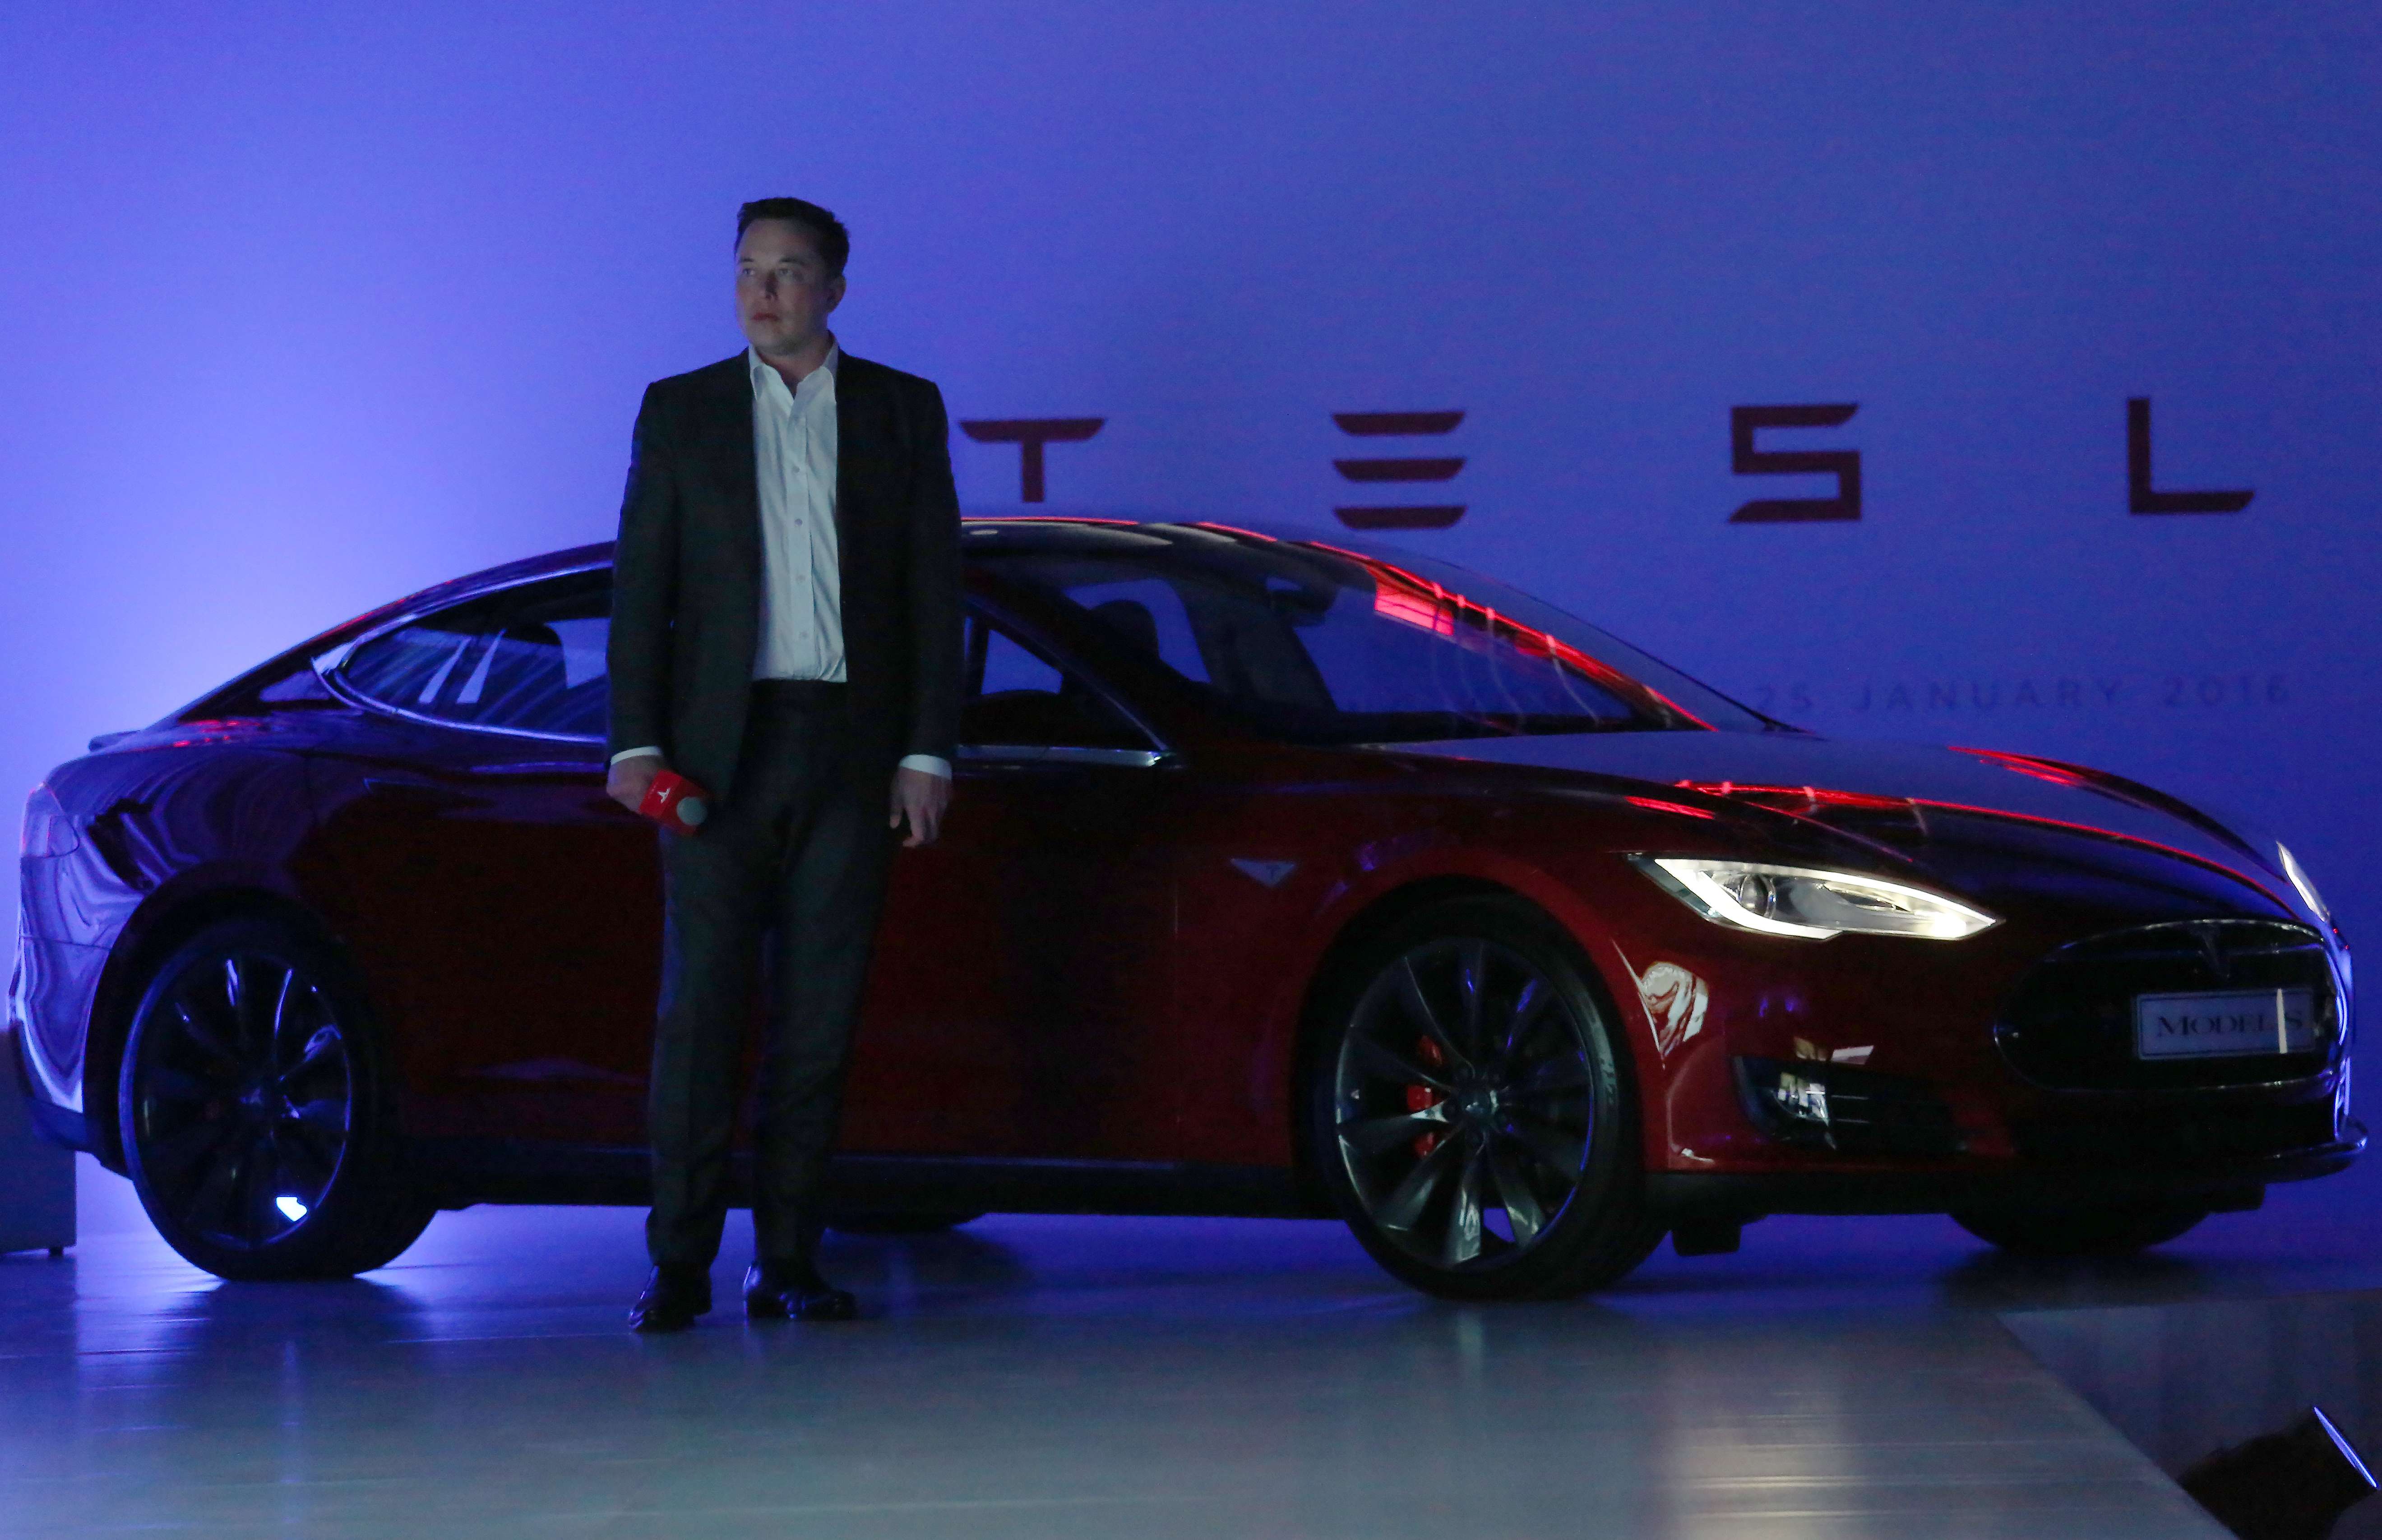 Tesla CEO Elon Musk next to a Model S which, along with the Model X, will receive incremental updates to their autopilot features. Photo: Nora Tam